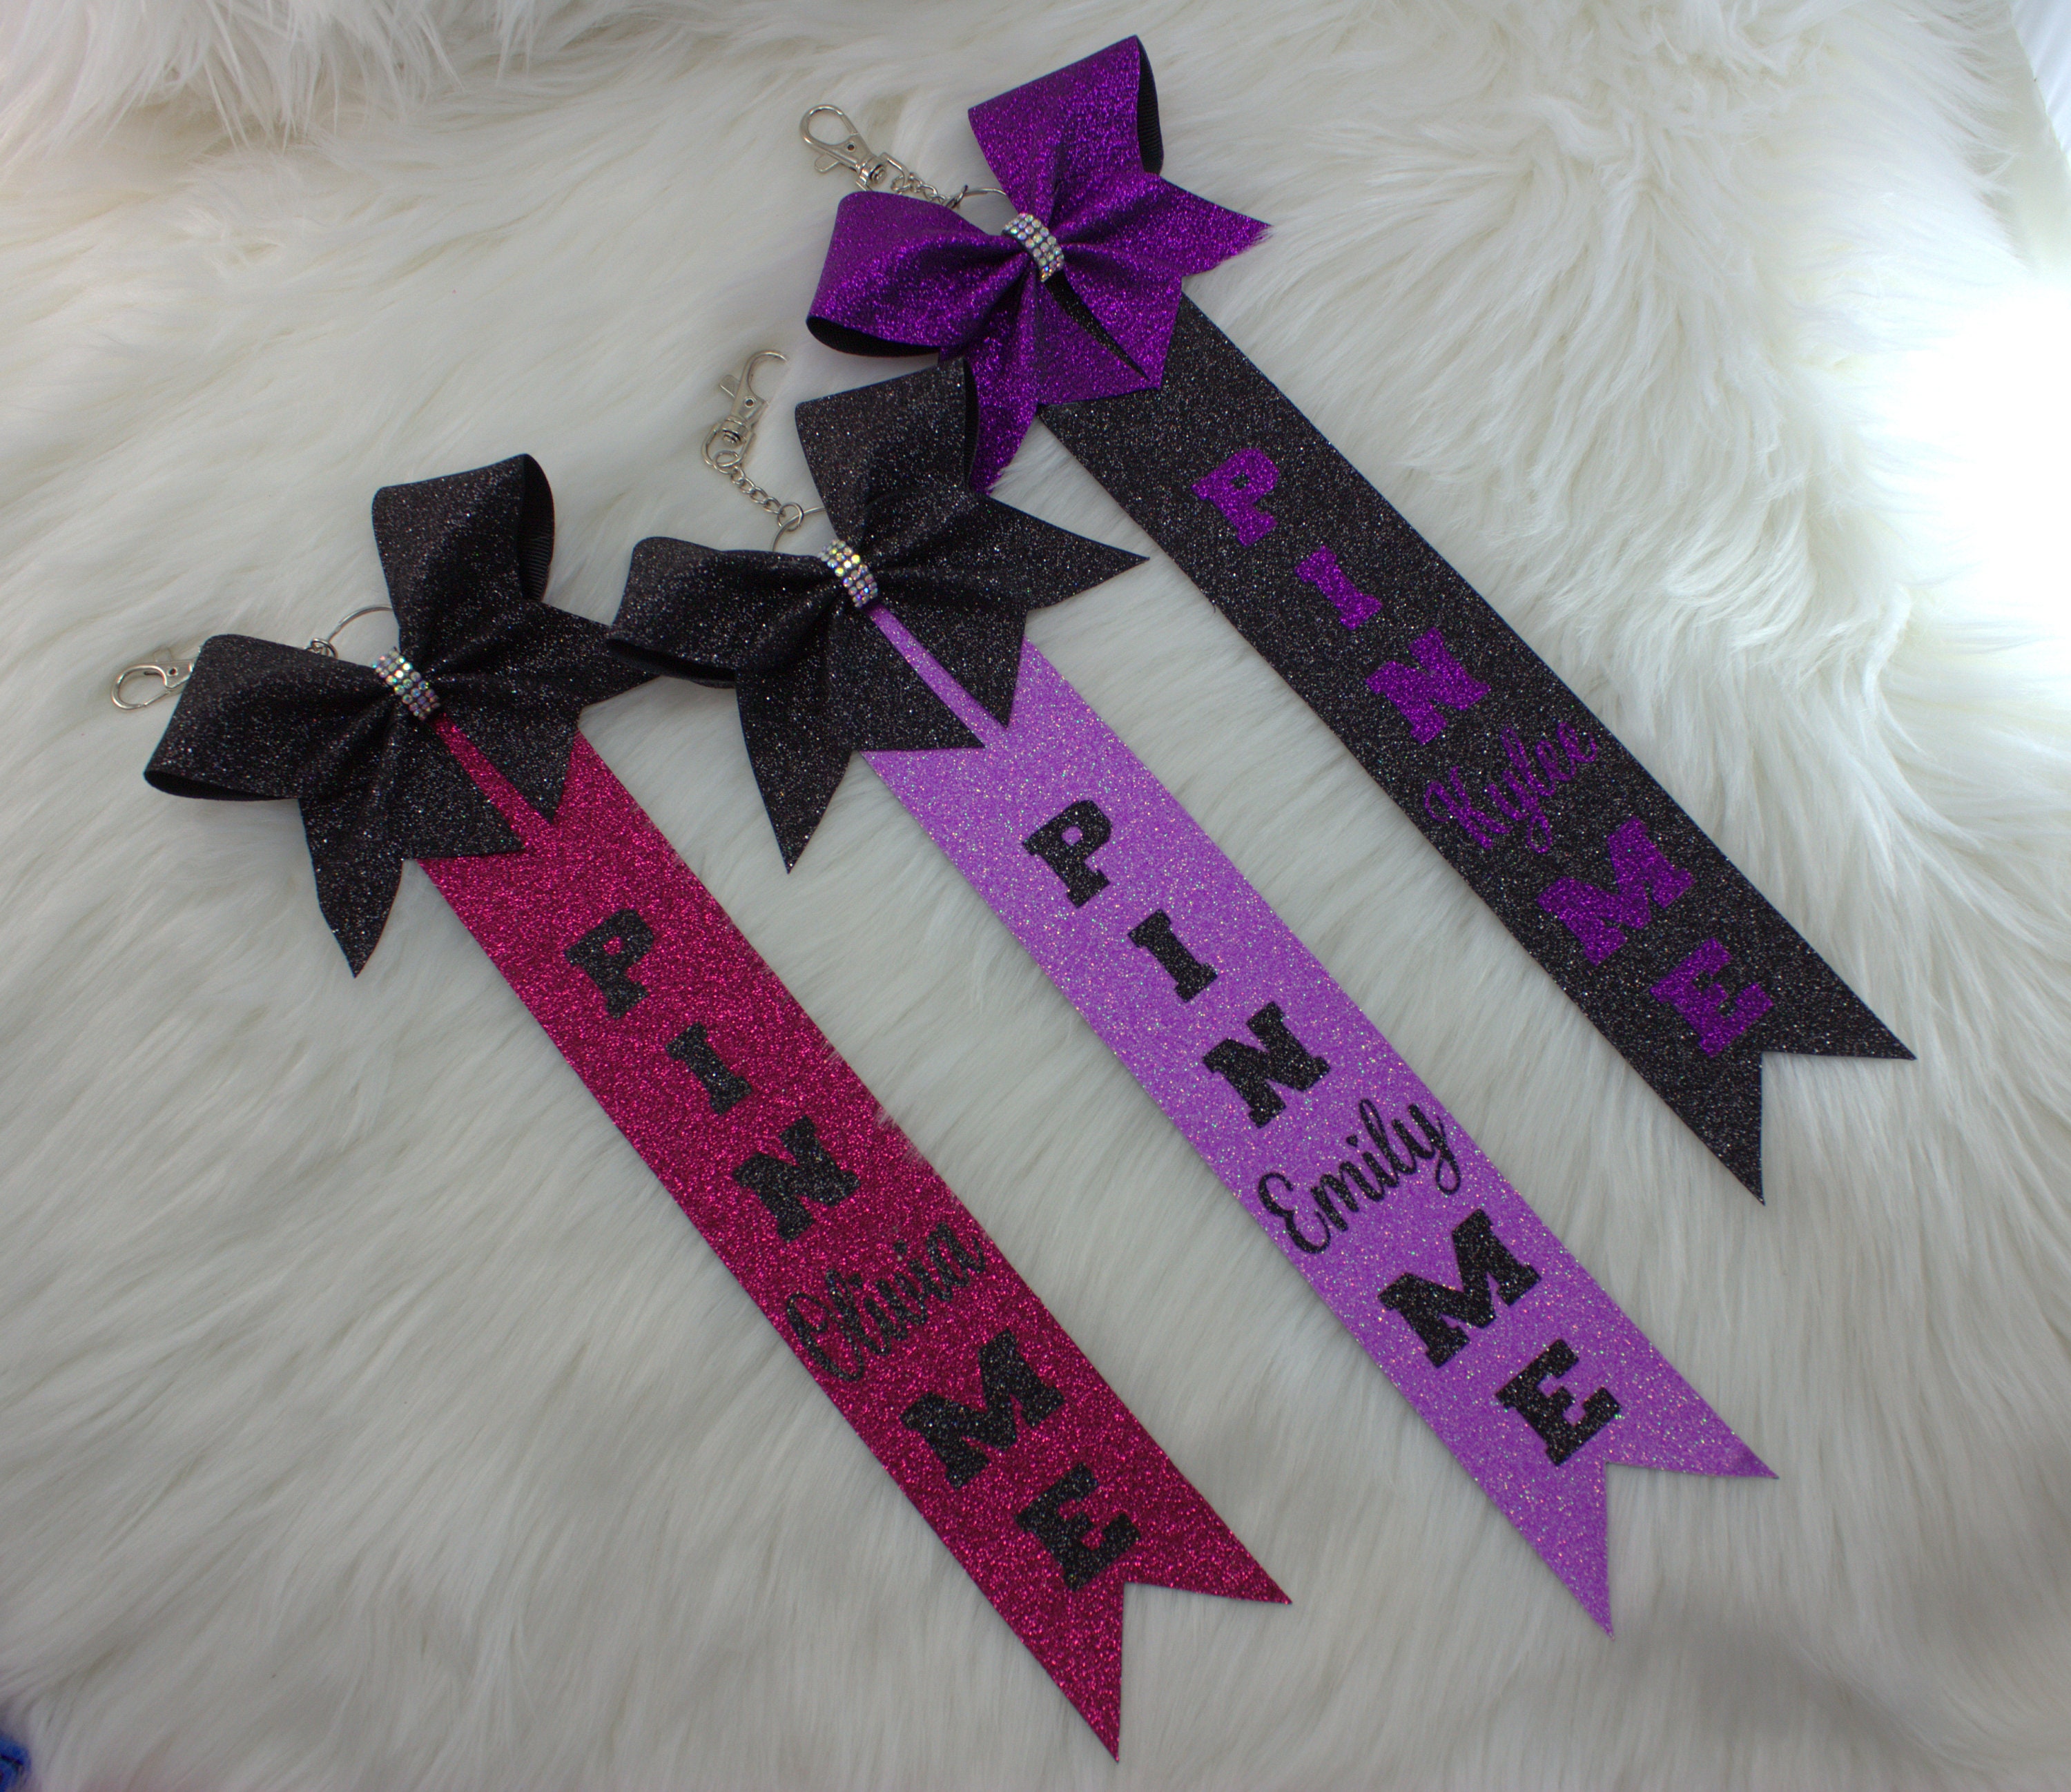 Pin Me Cheer Competition Tag Ribbons, Customizable Glitter Colors Add  Personalized Name 